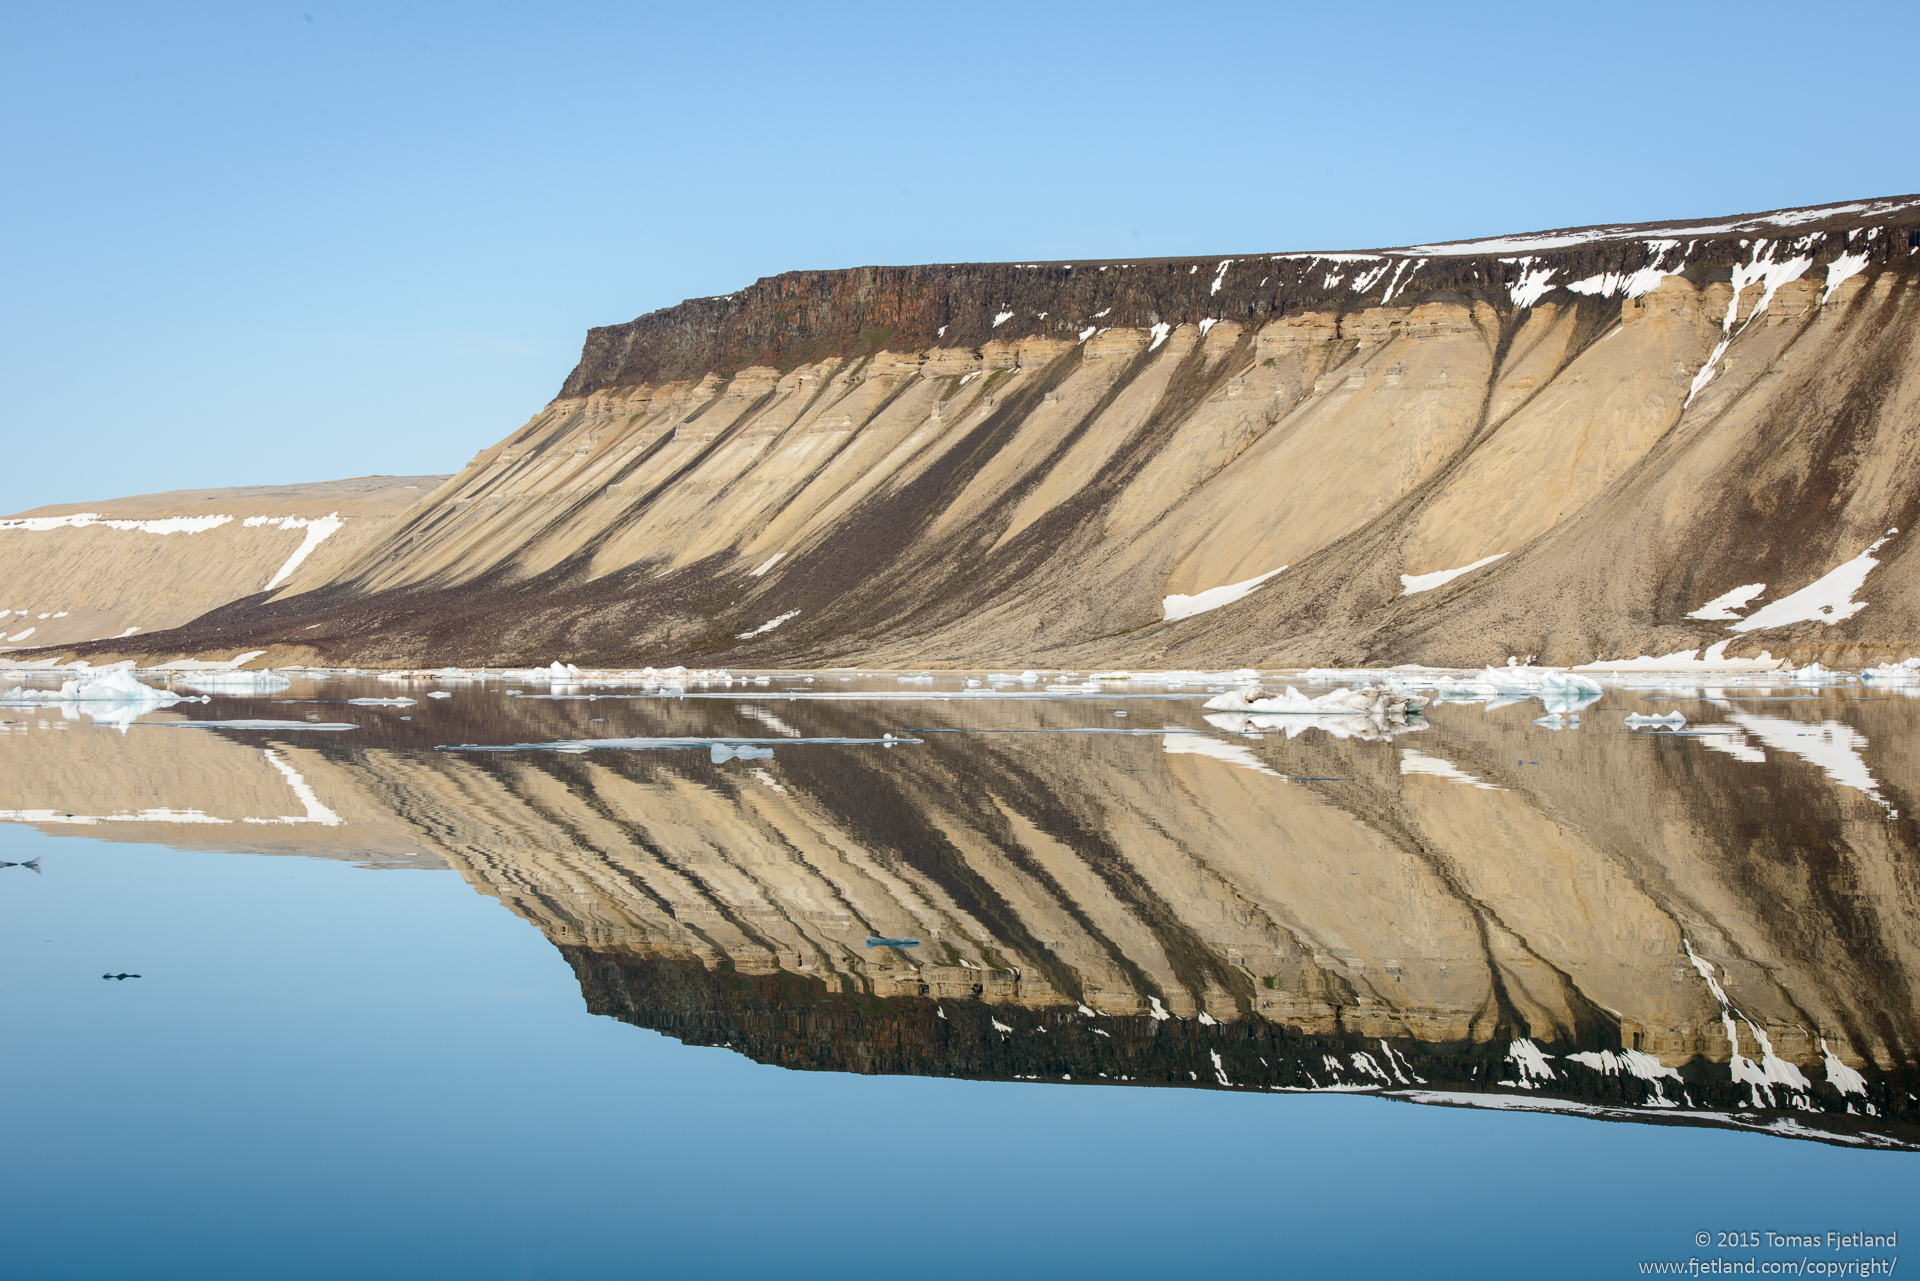 It's hard to believe you're in arctic seas with reflections like this